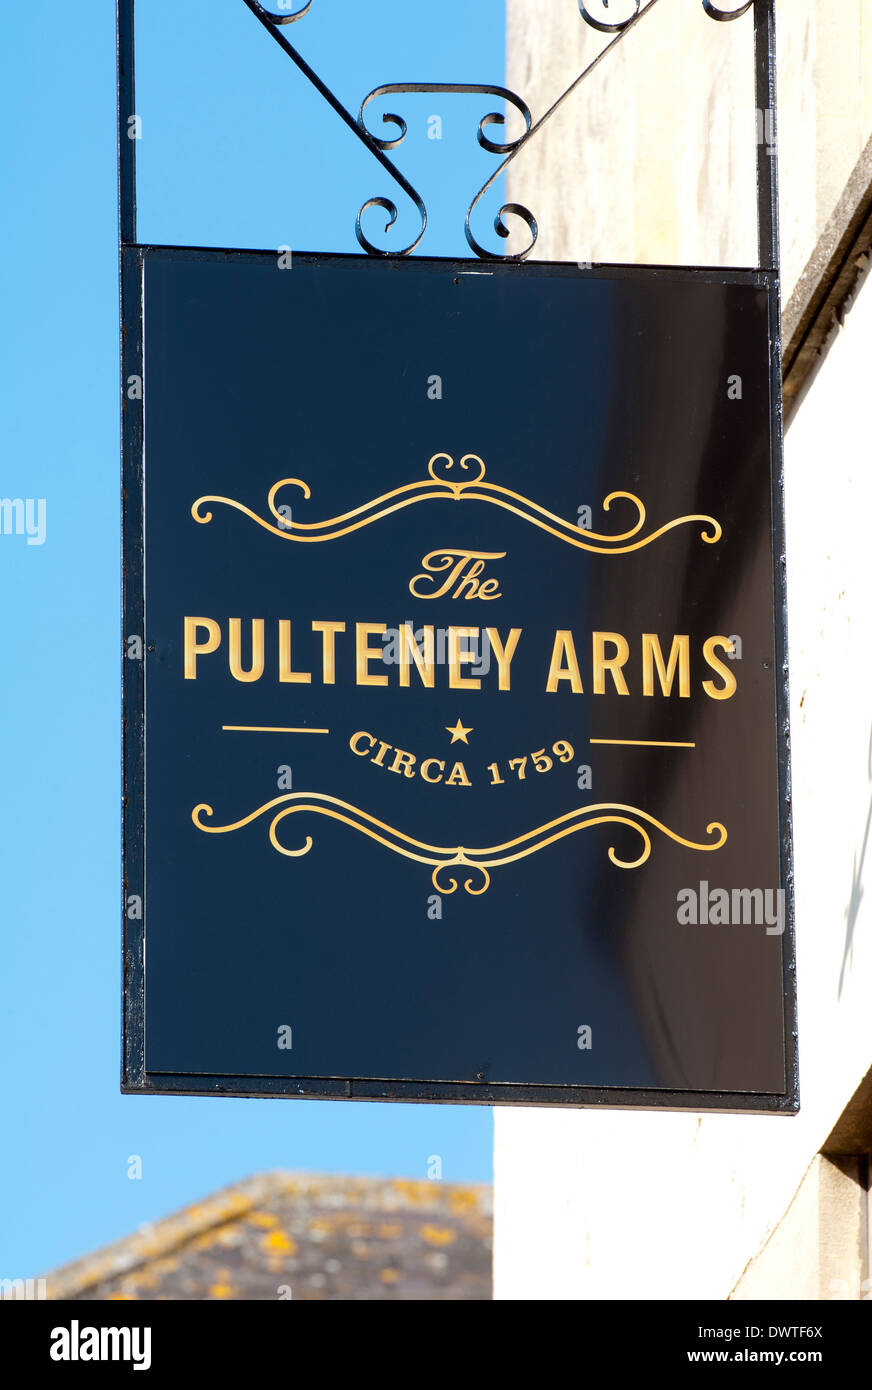 The Pulteney Arms pub sign, Bath, Somerset, England, UK Stock Photo